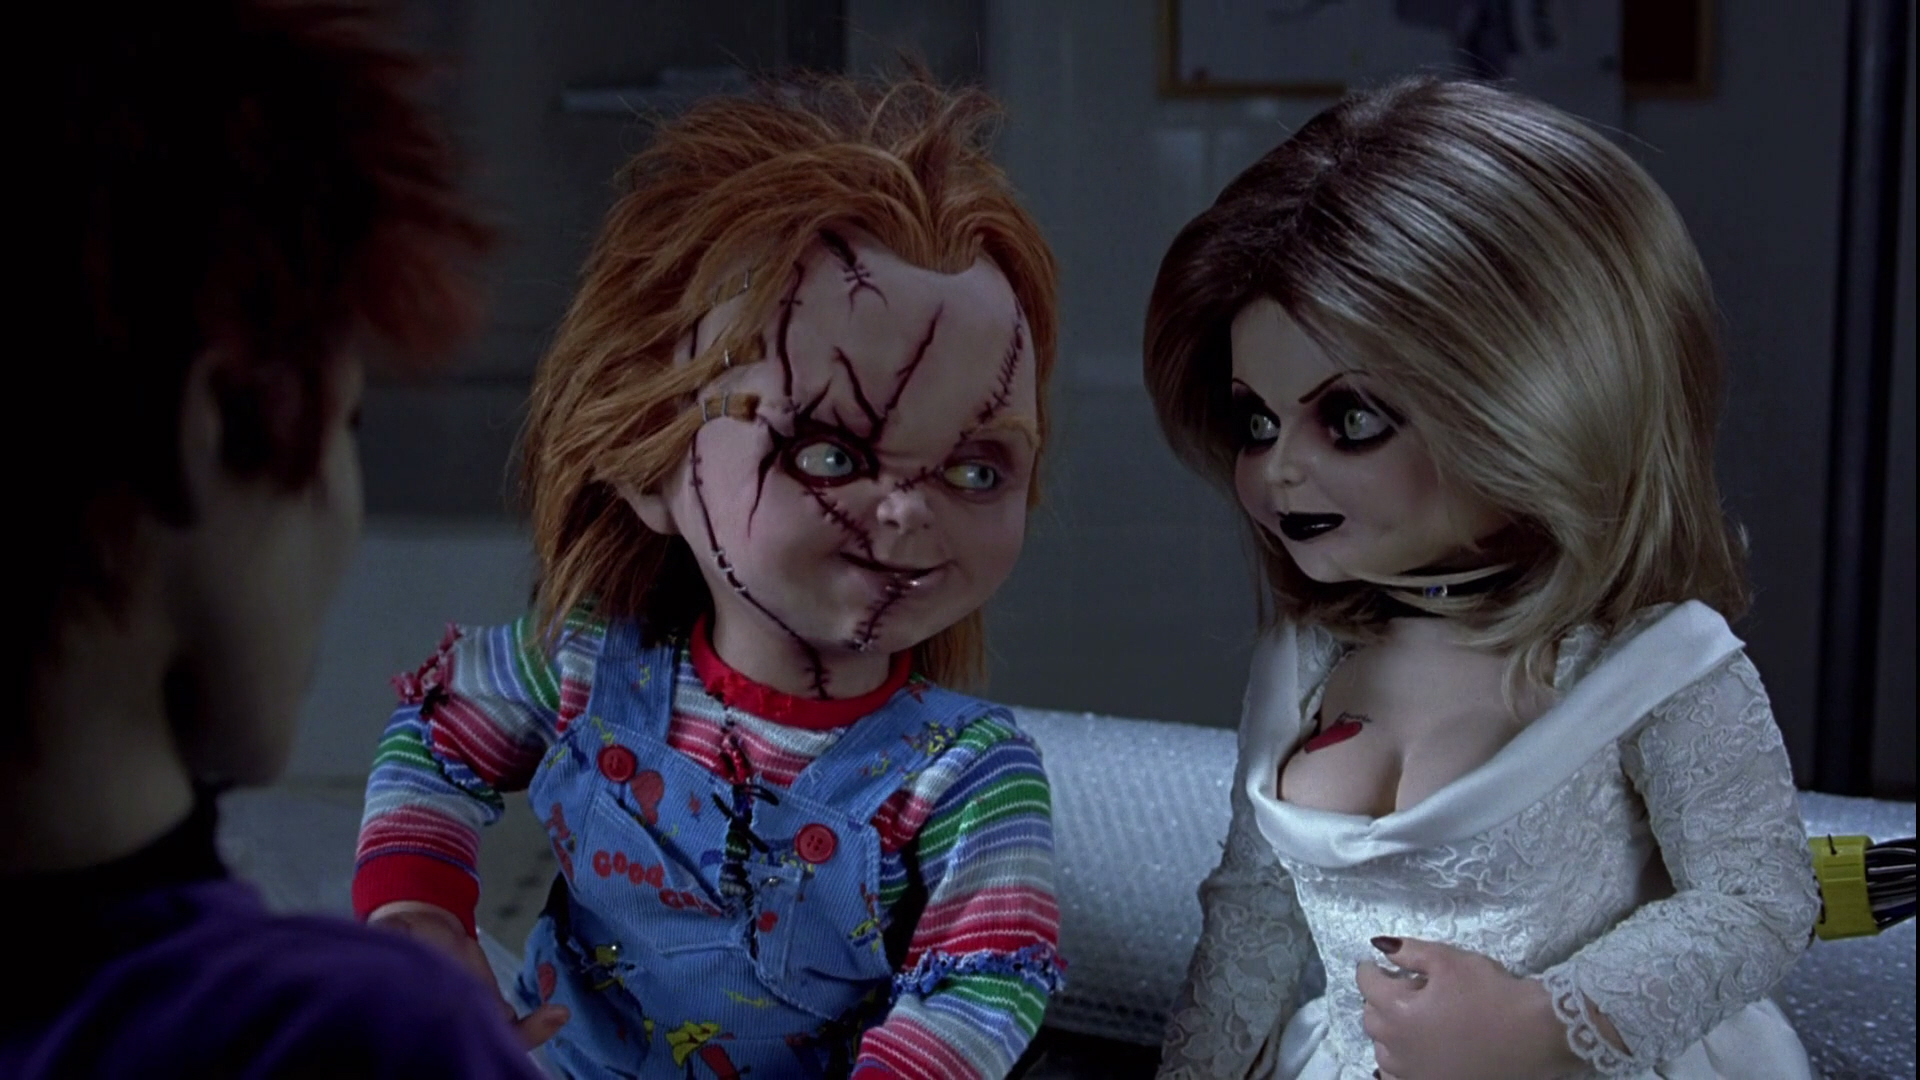 Pin Chucky An Tiffany Childs Play Wallpaper On